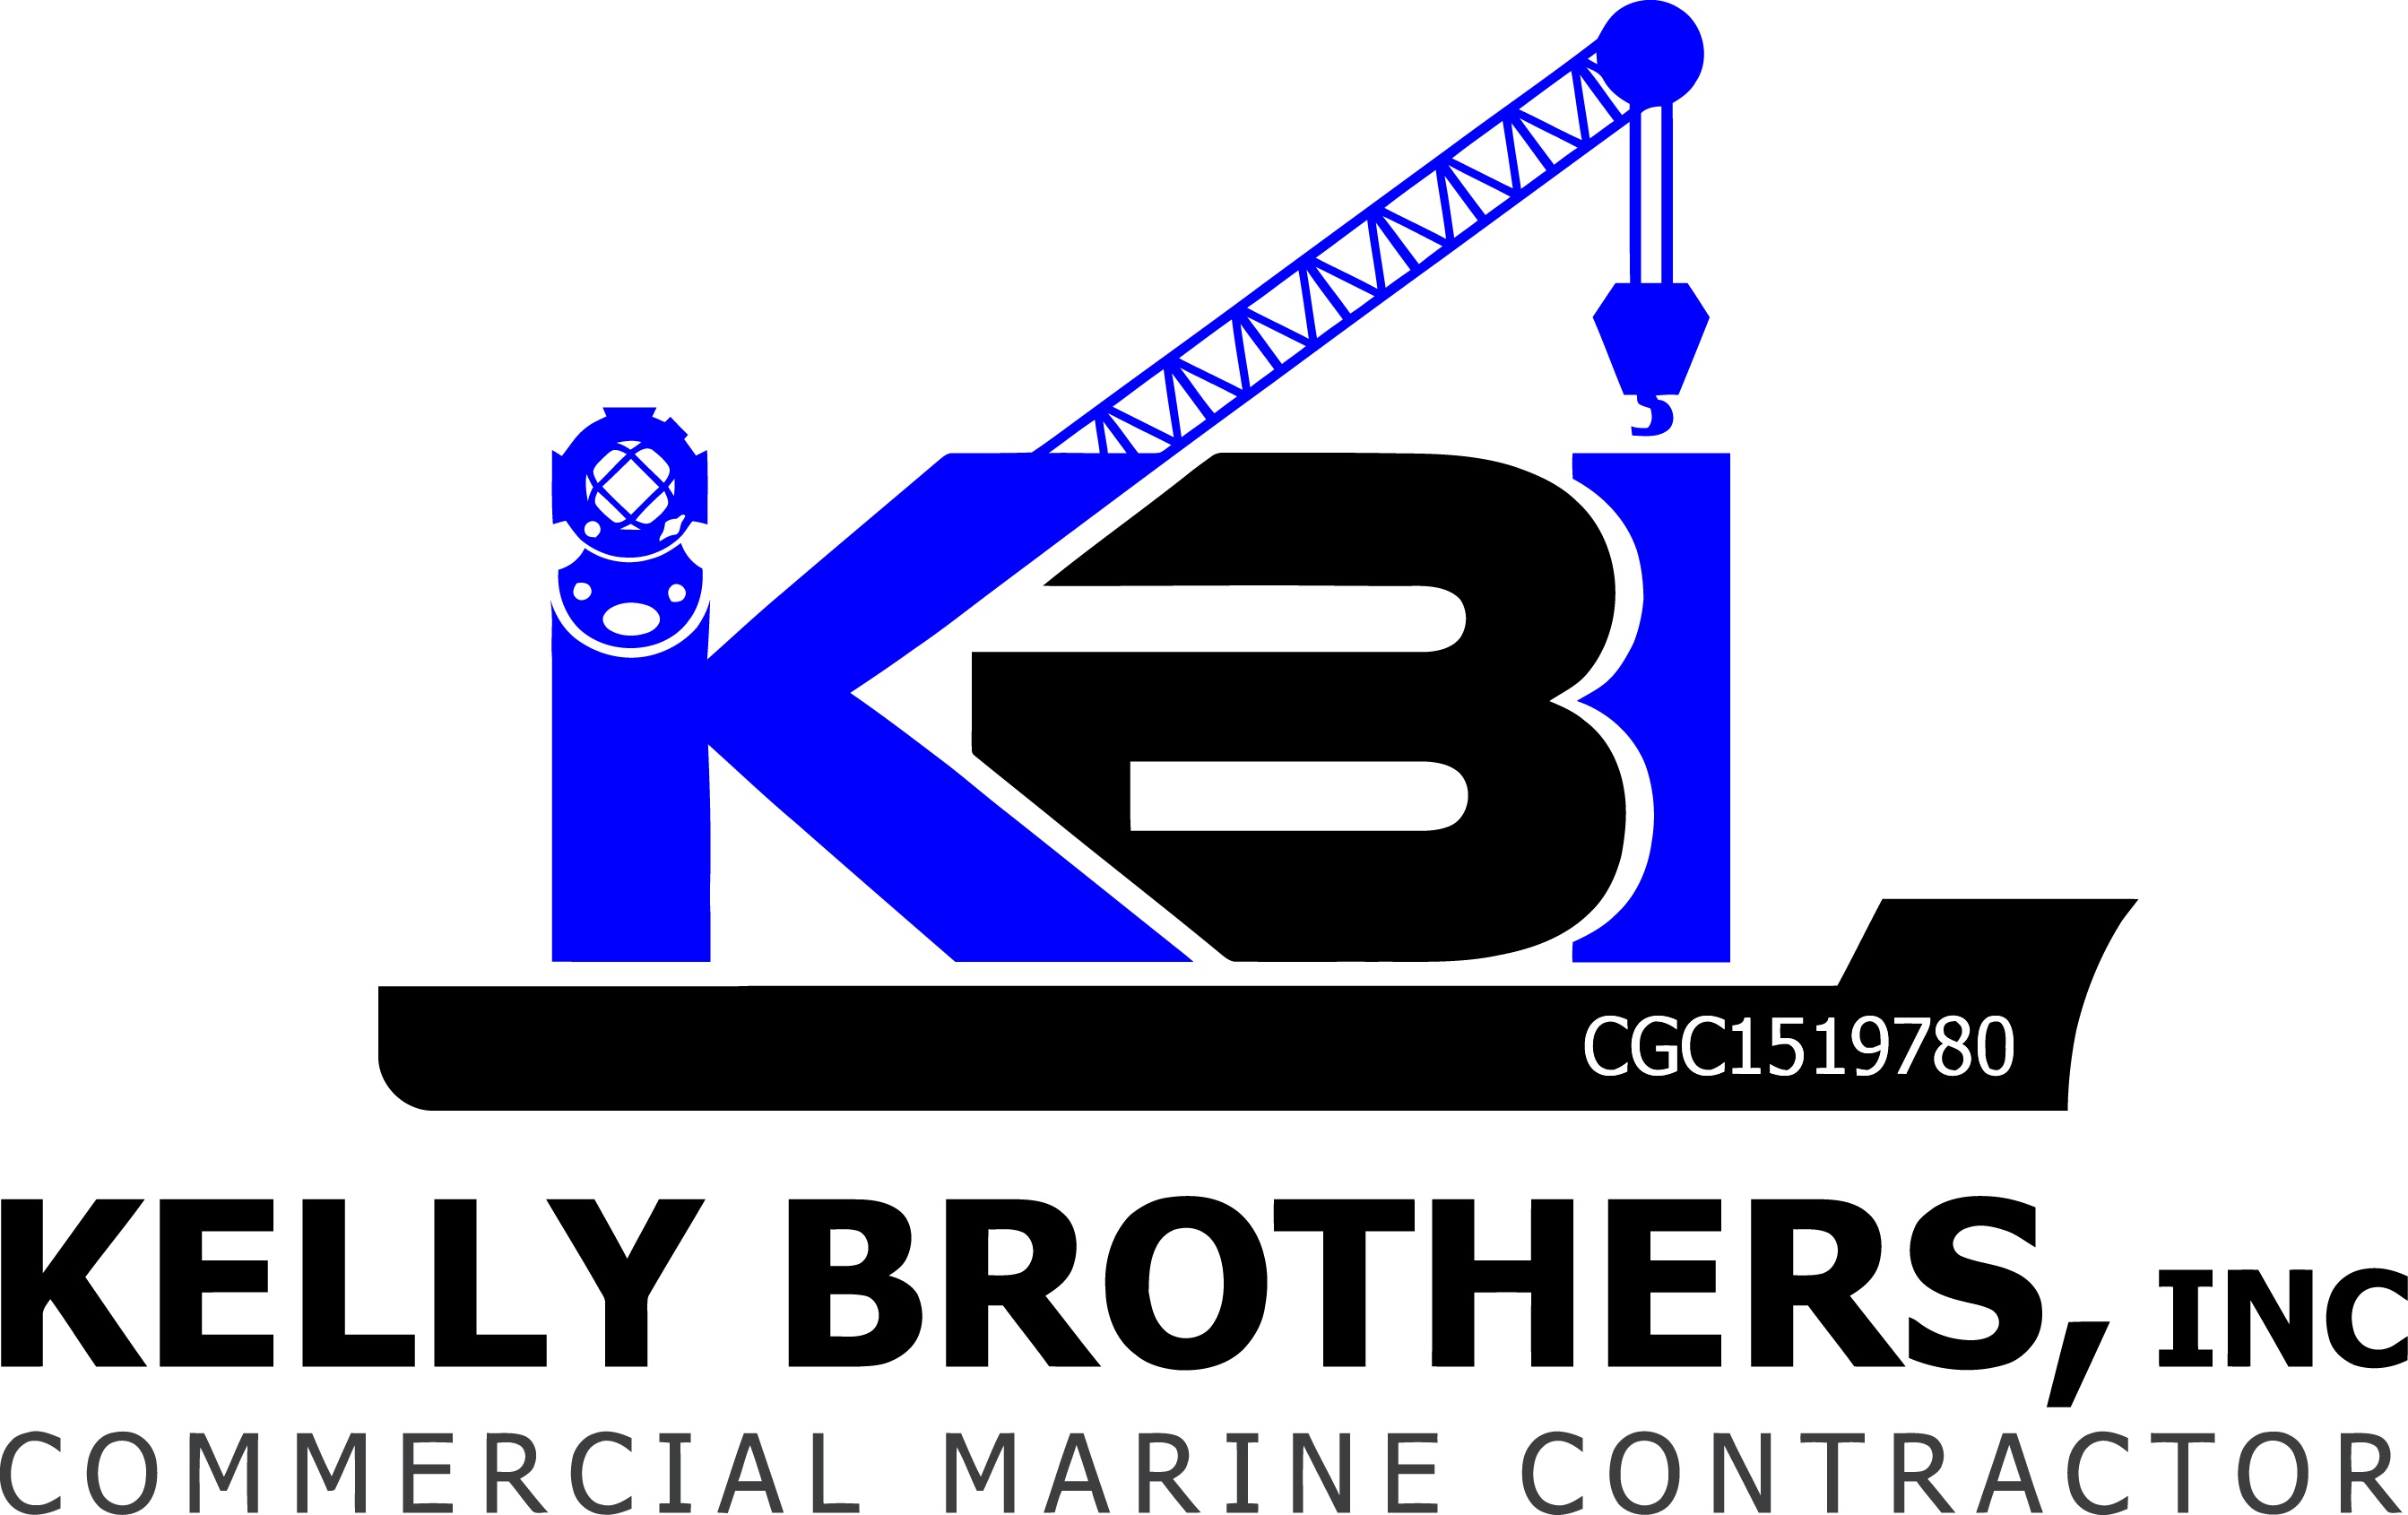 Our Company Kelly Brothers Inc Commercial Marine Construction